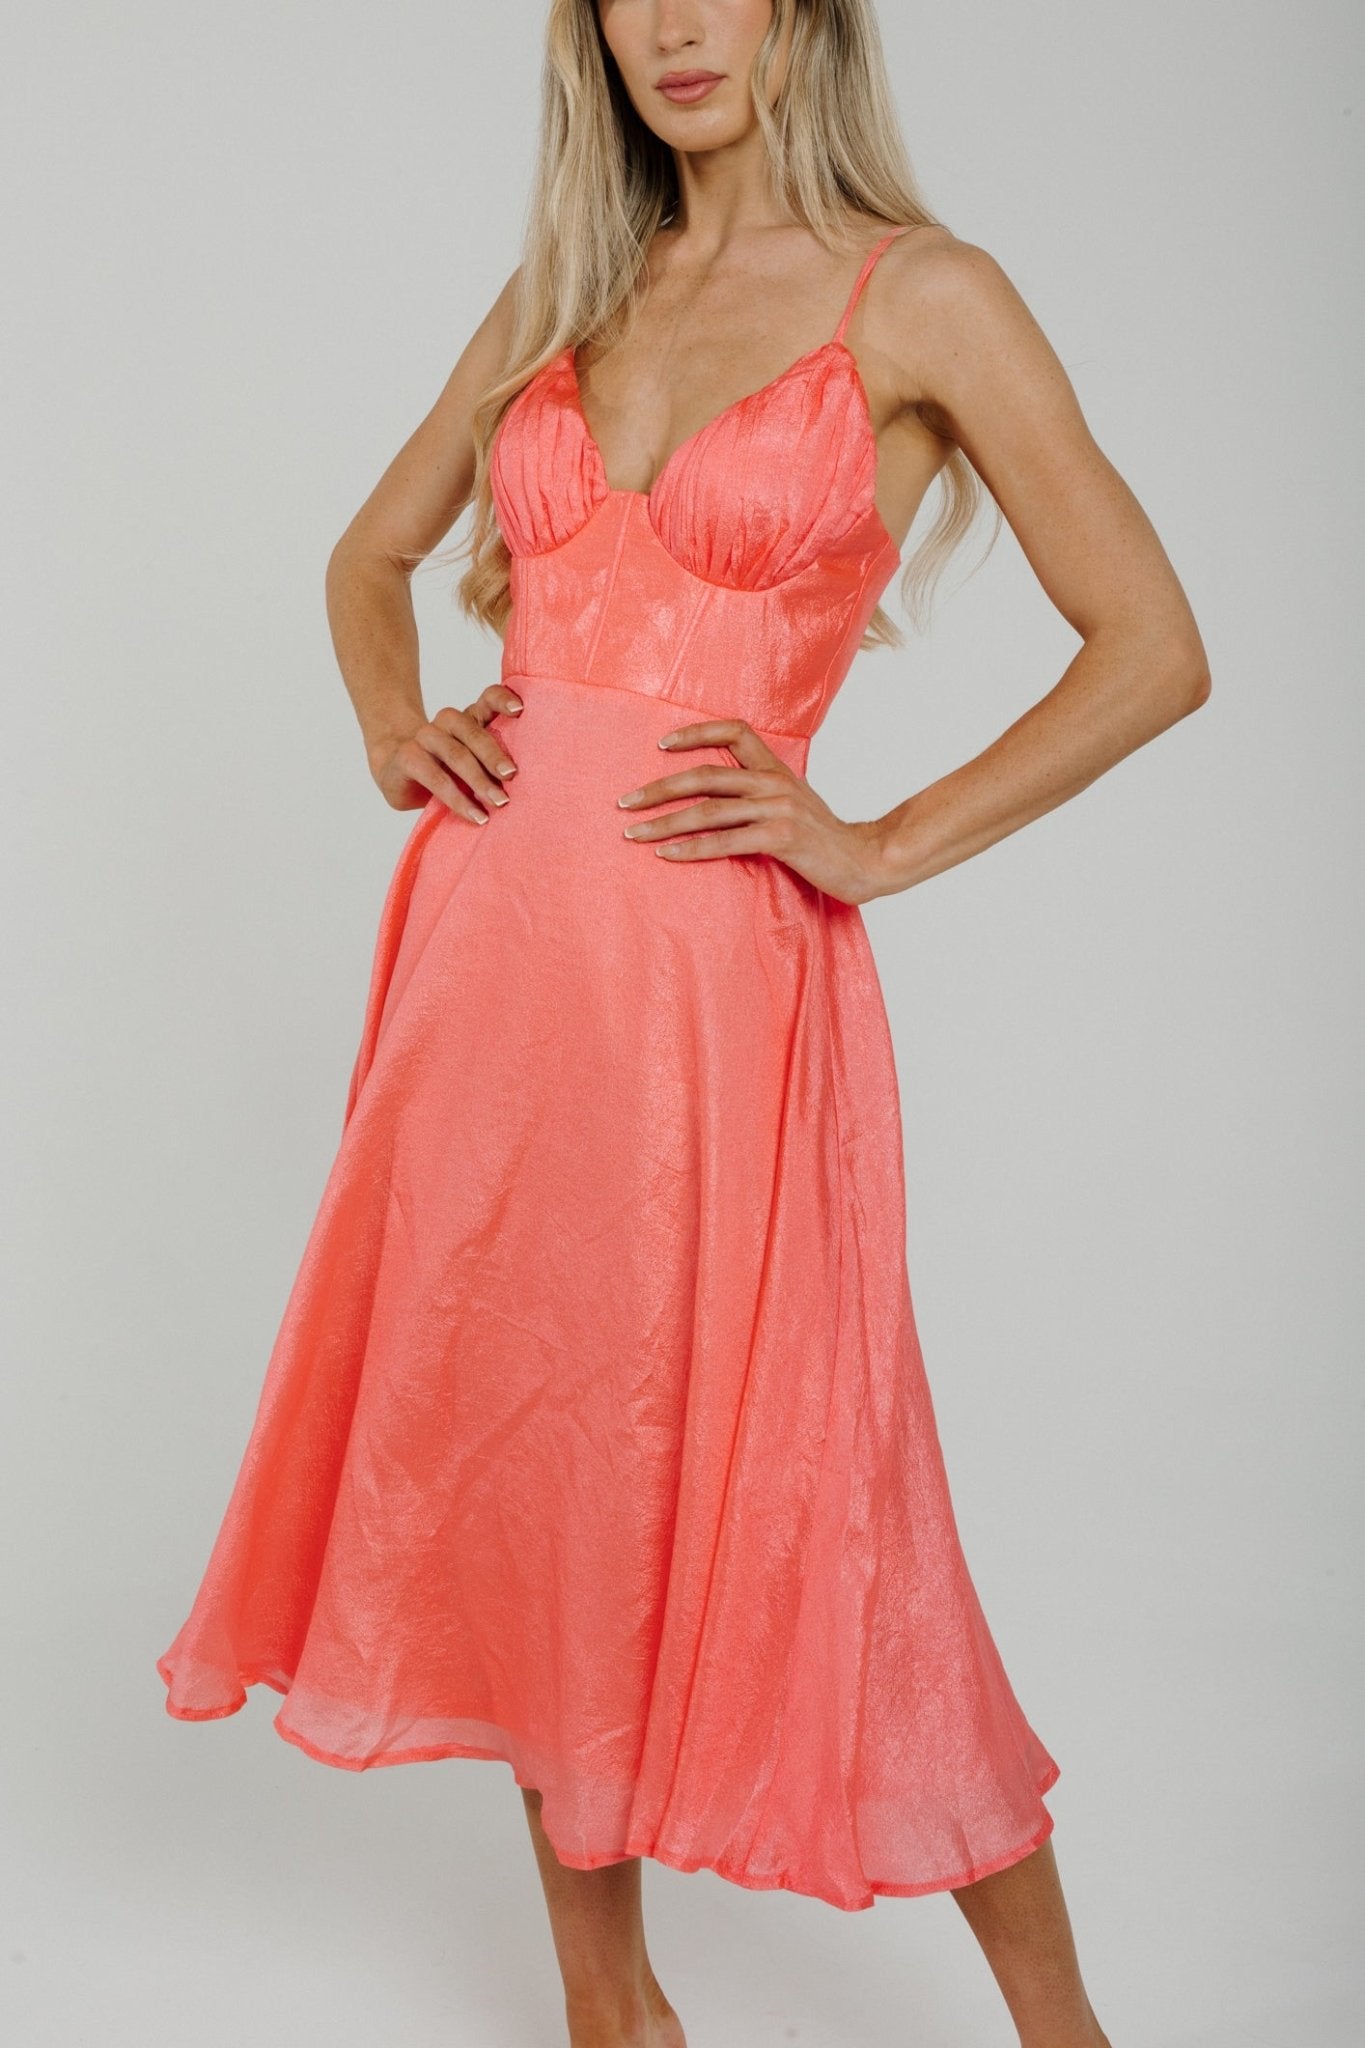 Holly Satin Mix Dress In Coral - The Walk in Wardrobe